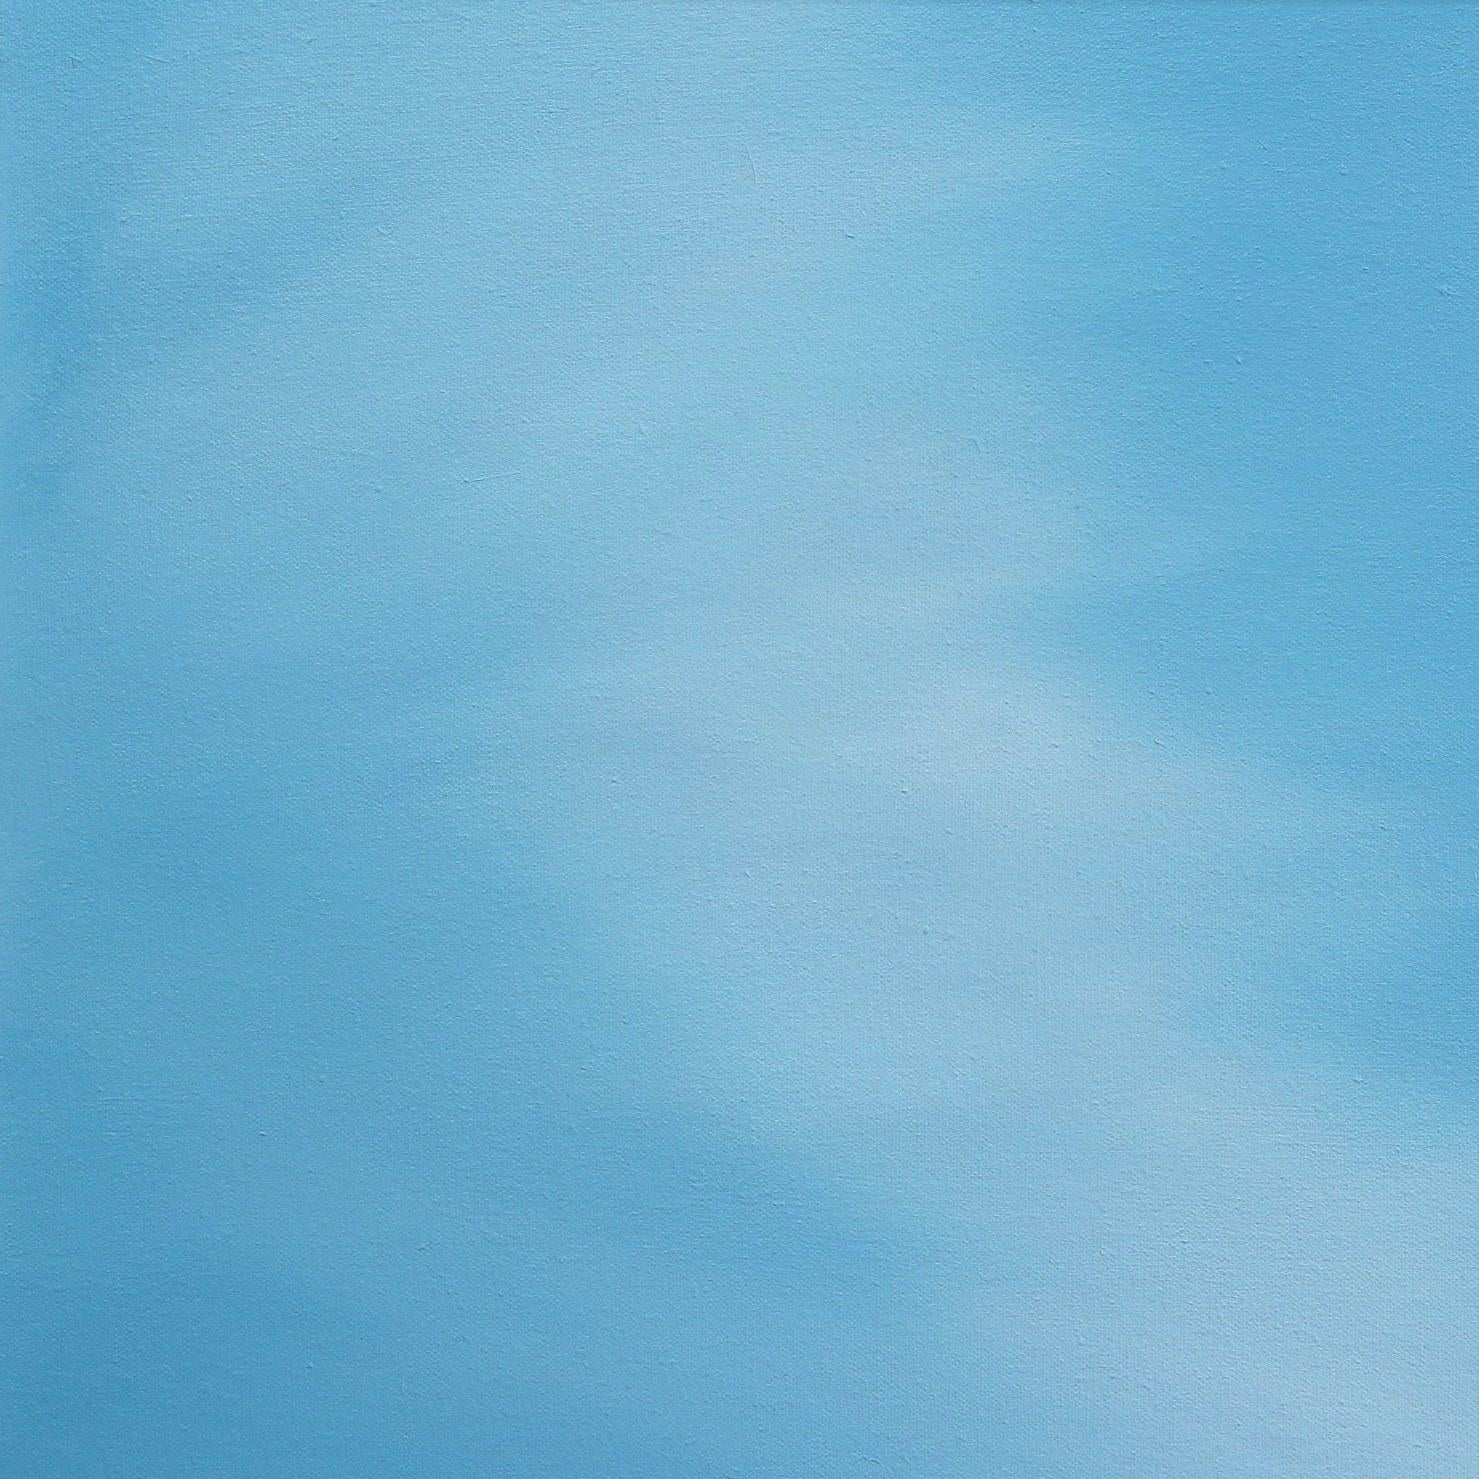 Untitled No. 763 - Framed Contemporary Minimalist Blue Artwork For Sale 1